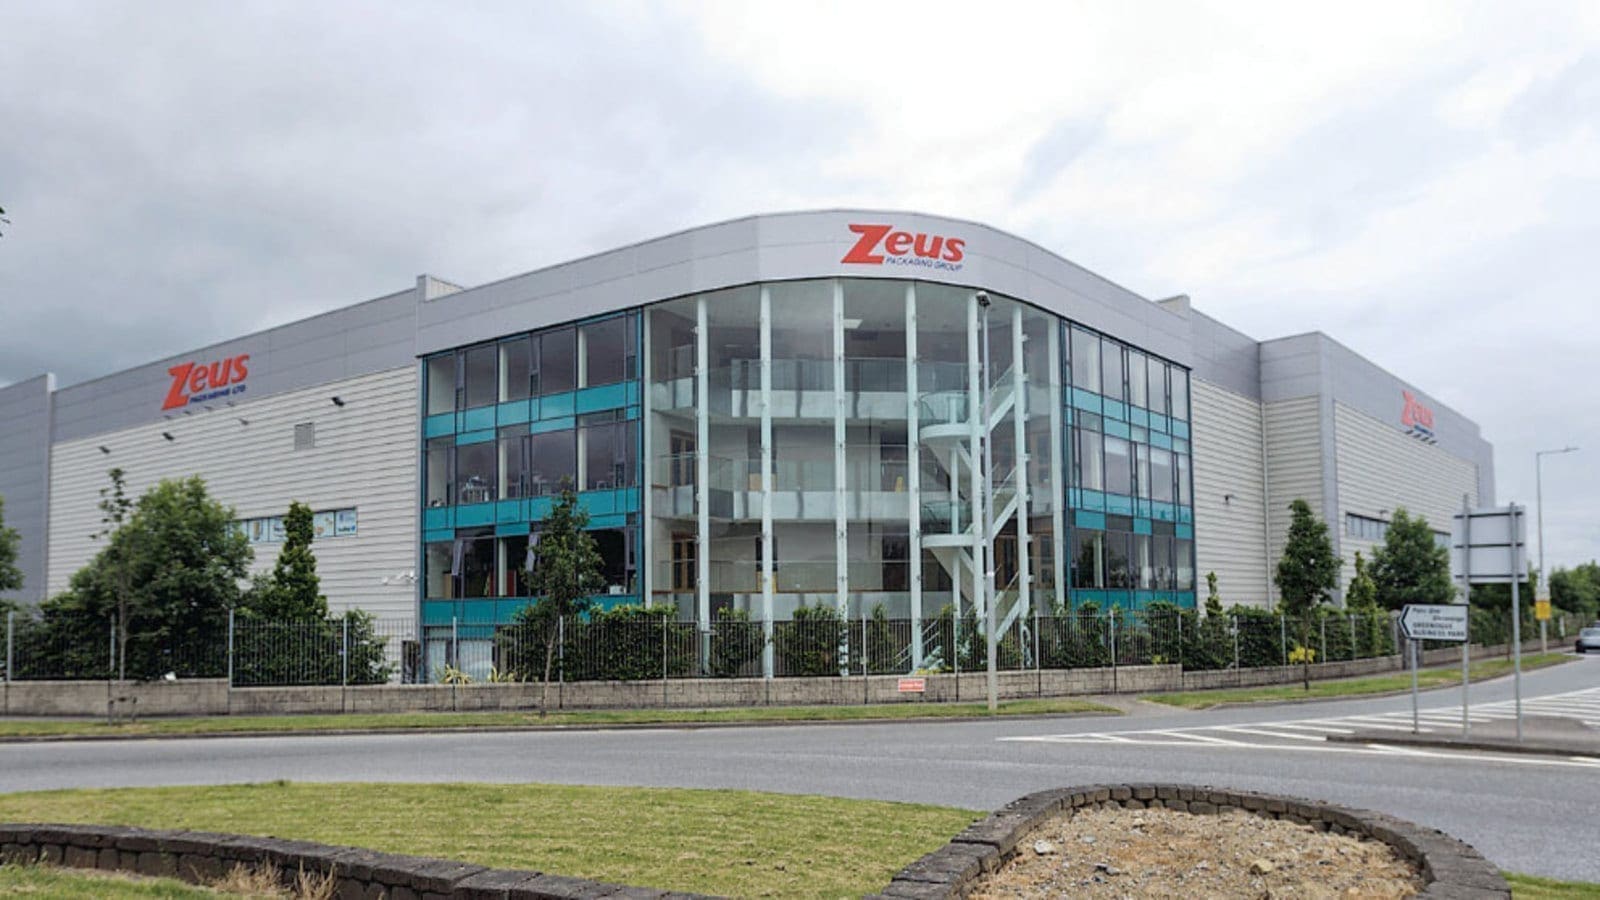 Zeus Packaging makes it biggest acquisition yet in aggressive European expansion